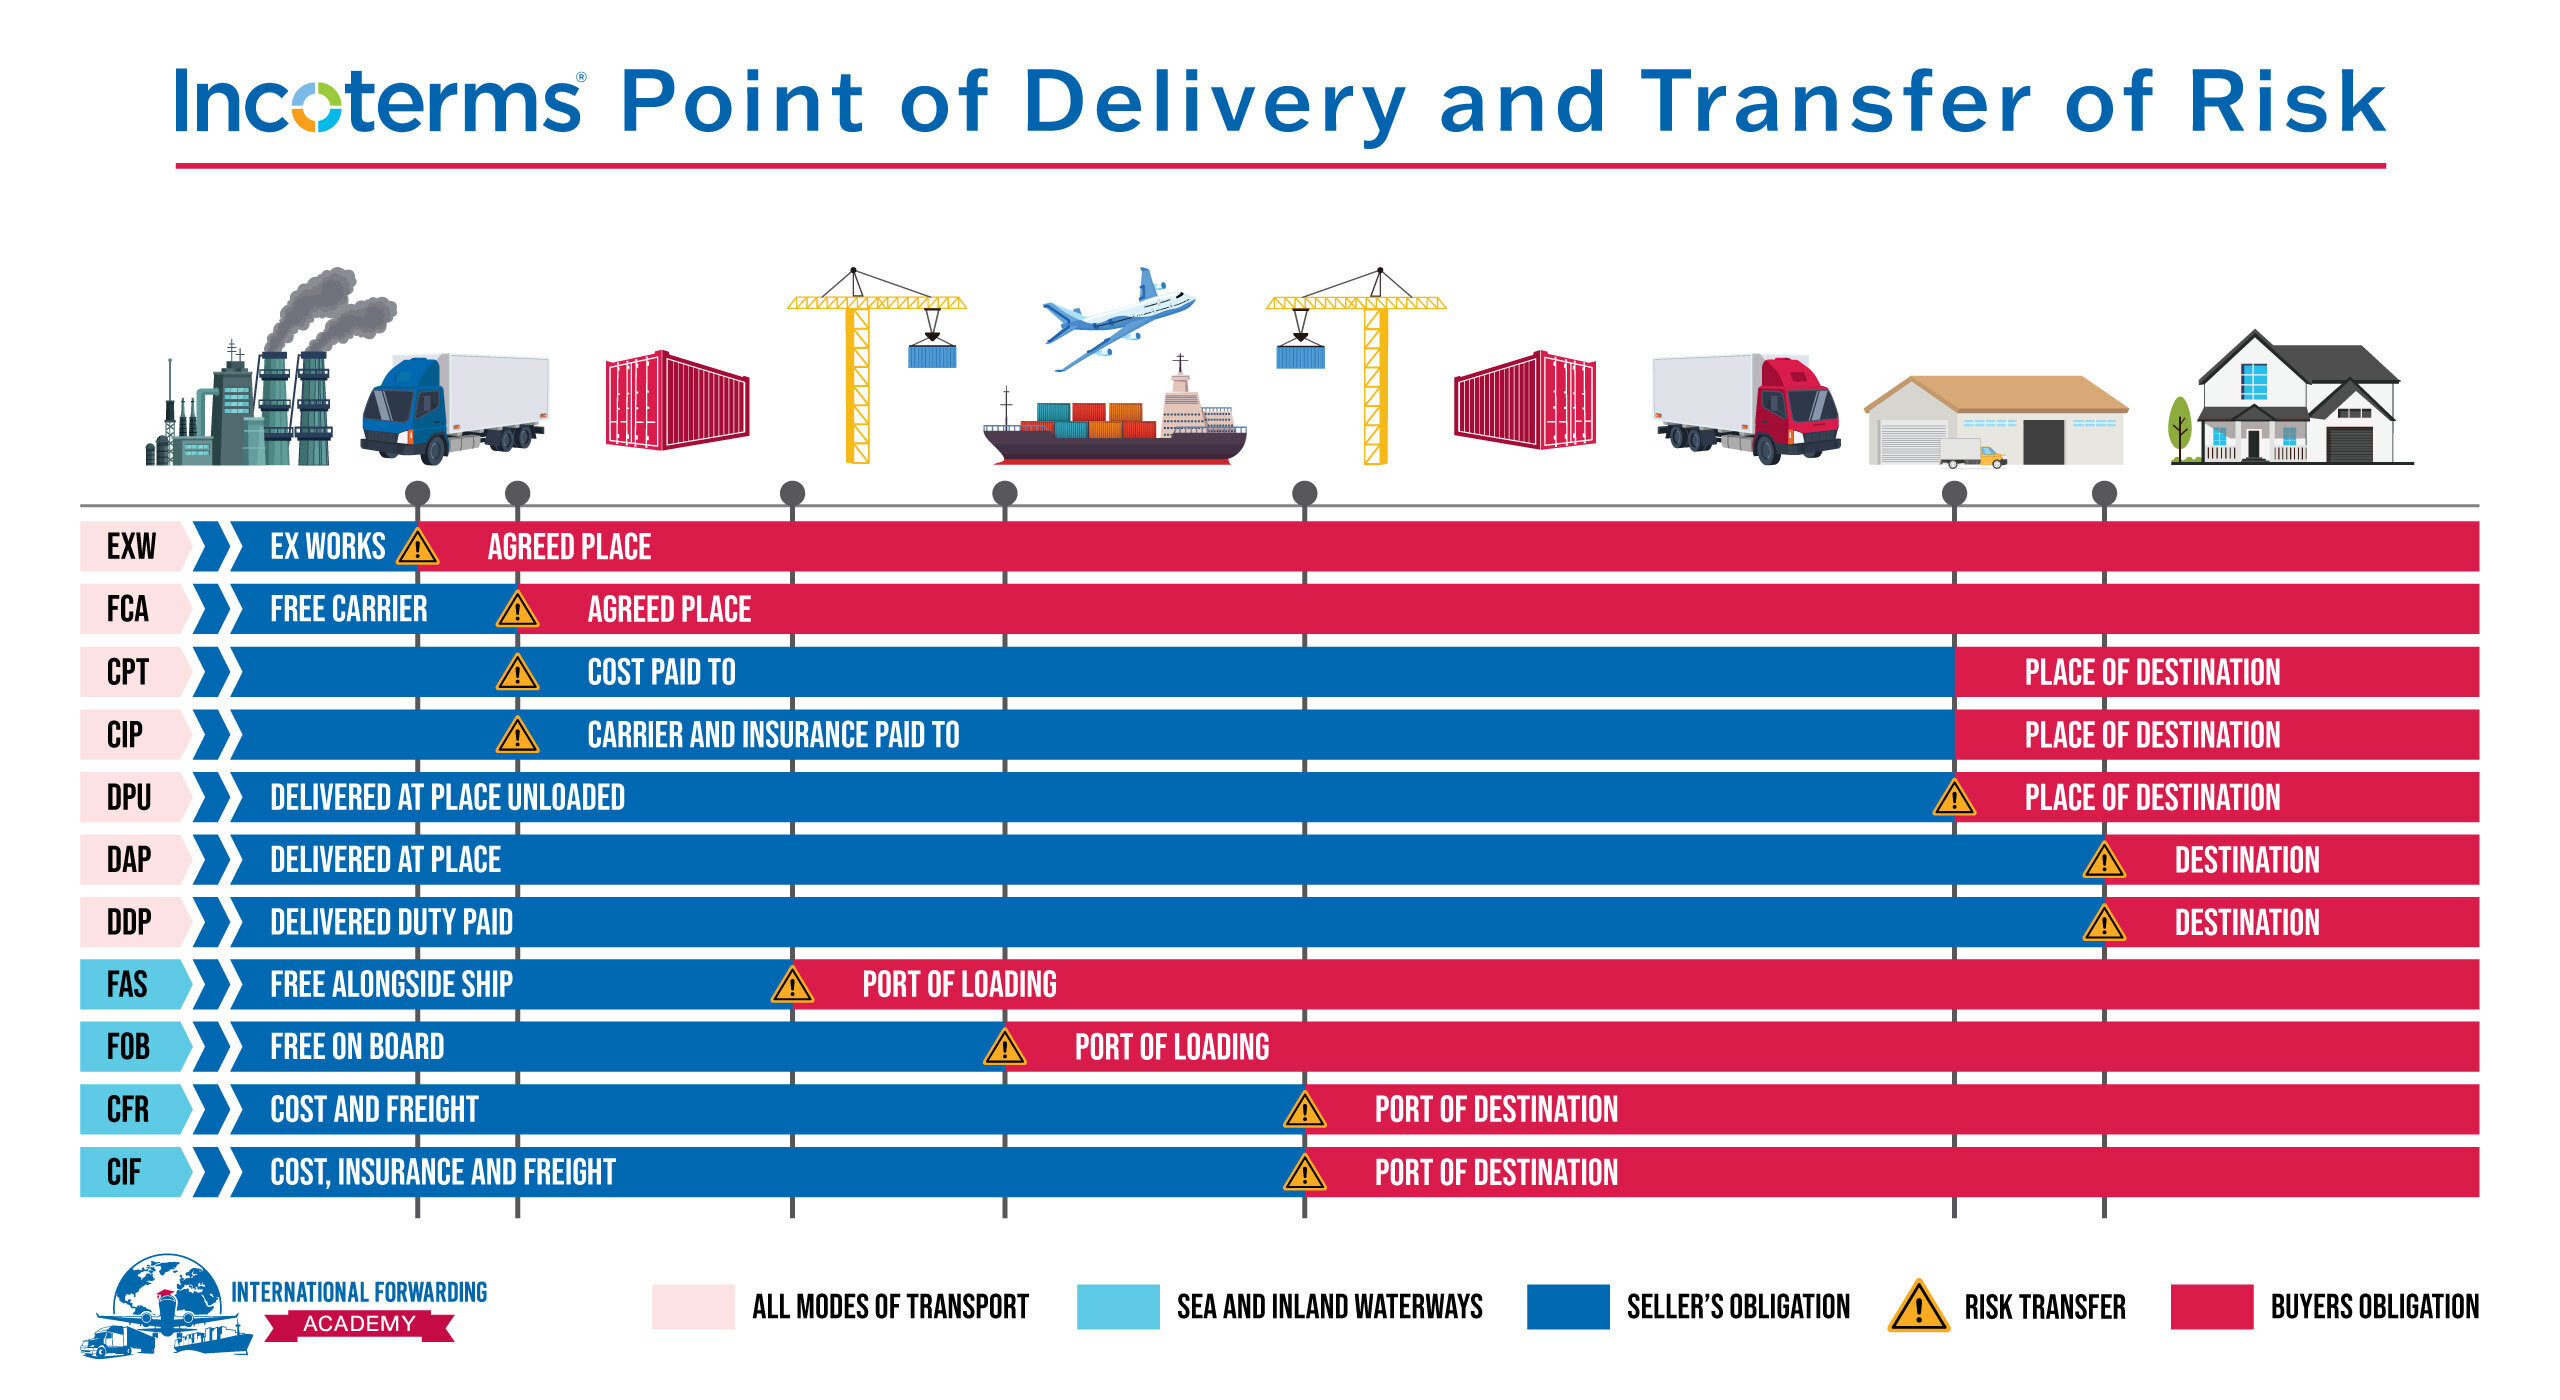 IFA Incoterms Point of Delivery and Transfer of Risk